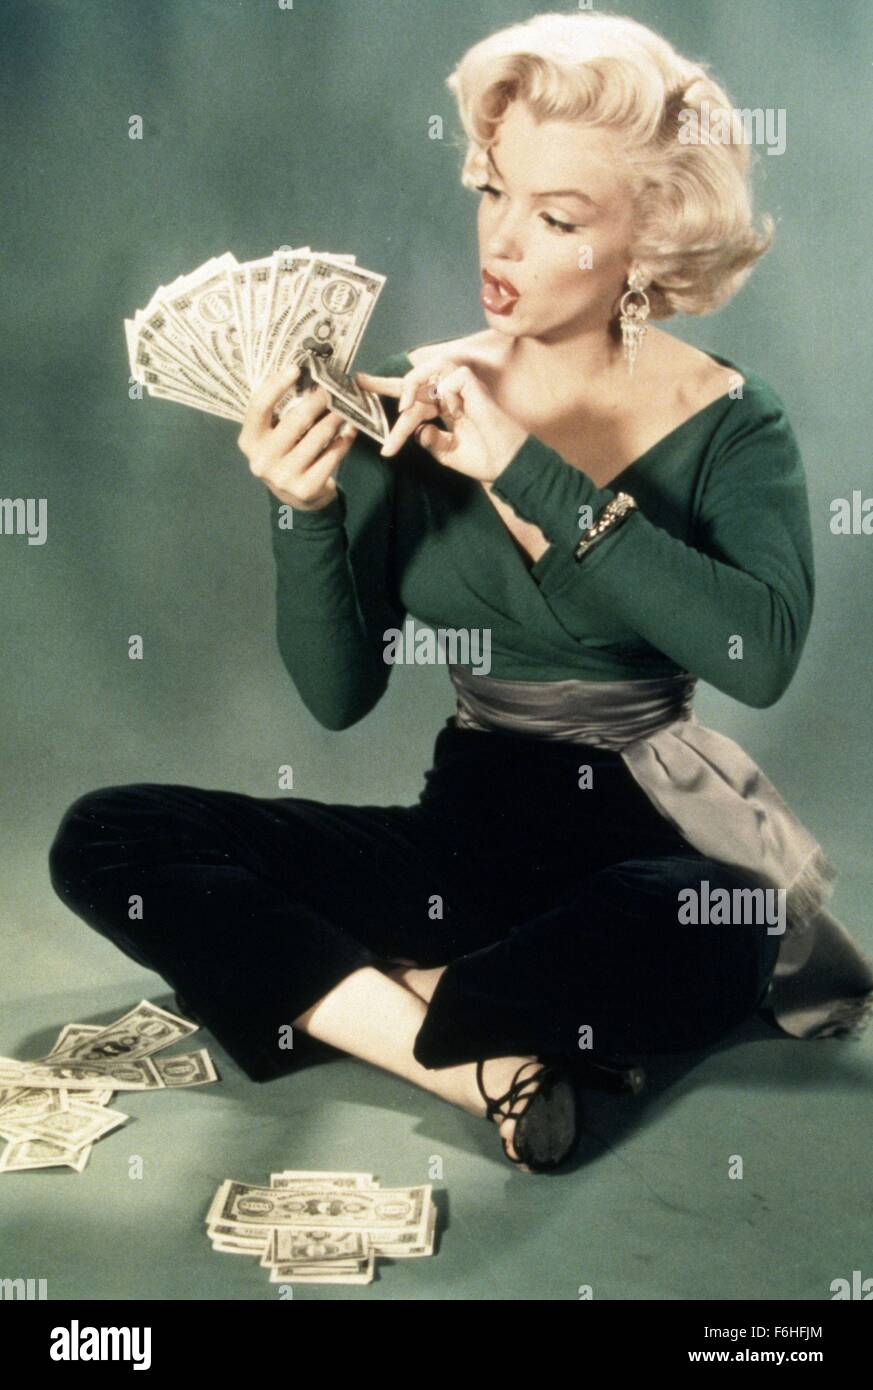 1953, Film Title: HOW TO MARRY A MILLIONAIRE, Director: JEAN NEGULESCO, Studio: FOX, Pictured: MARILYN MONROE, PORTRAIT, COUNTING, MONEY, GREEDY, STUDIO, GREEN, SITTING, CROSS LEGGED, AMAZED, SURPRISED, EXCITED, BOMBSHELL, BLONDE. (Credit Image: SNAP) Stock Photo